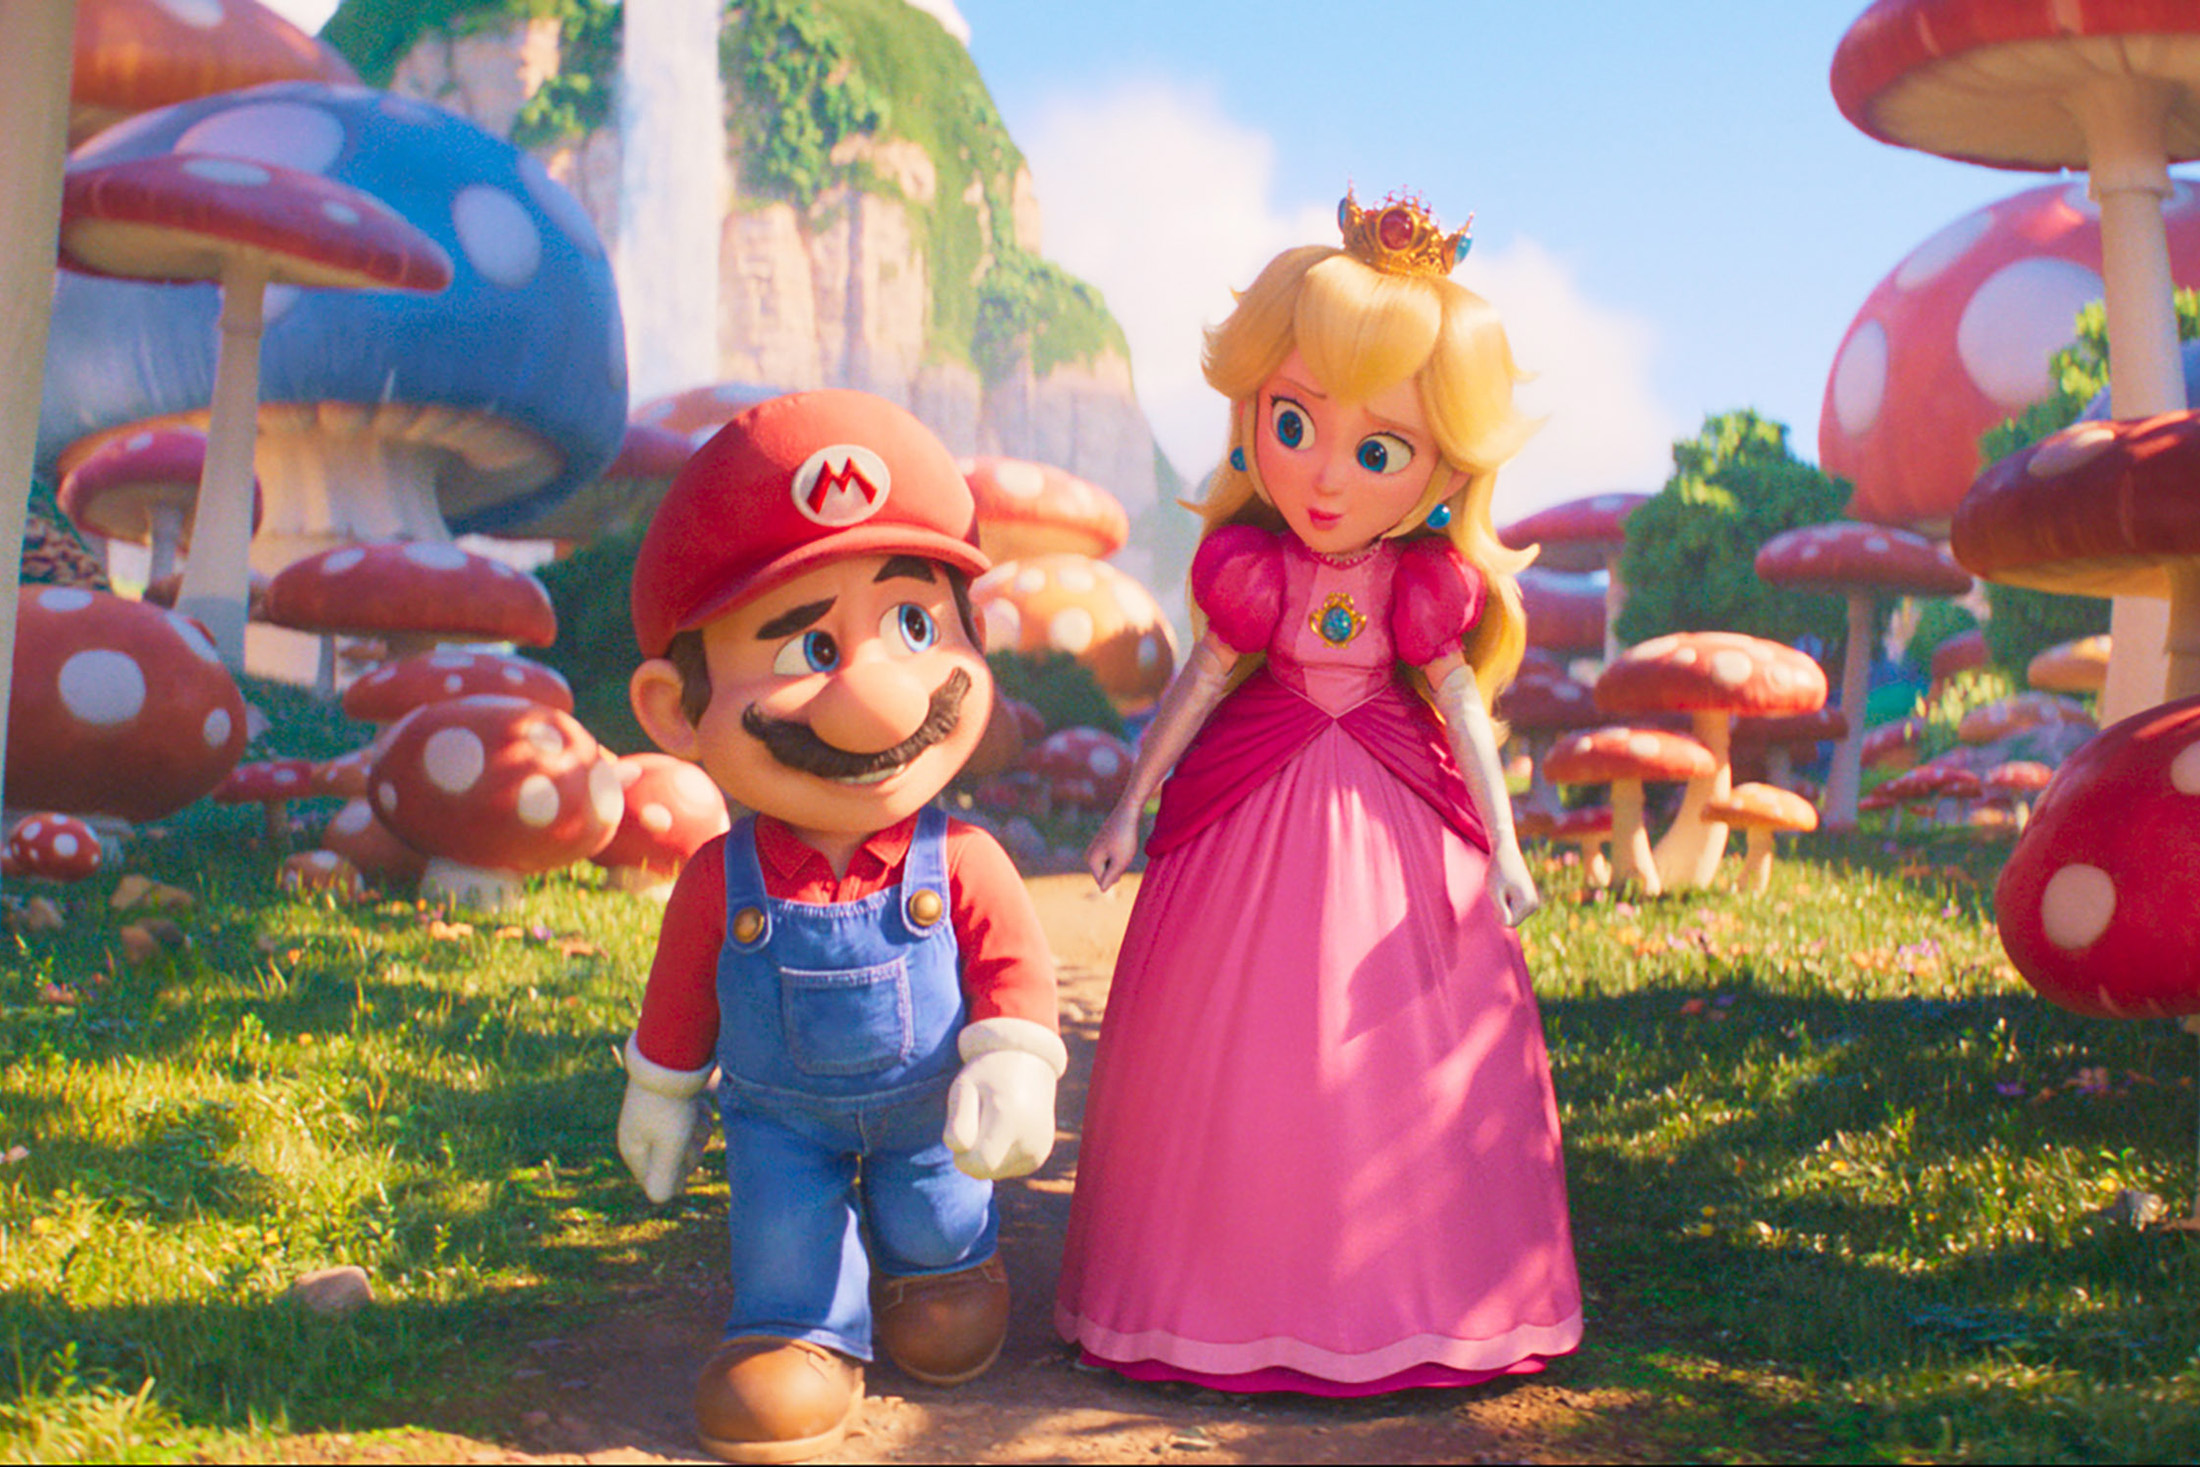 Super Mario Bros. Producer Explains The Movie's Box Office Success -  Bloomberg